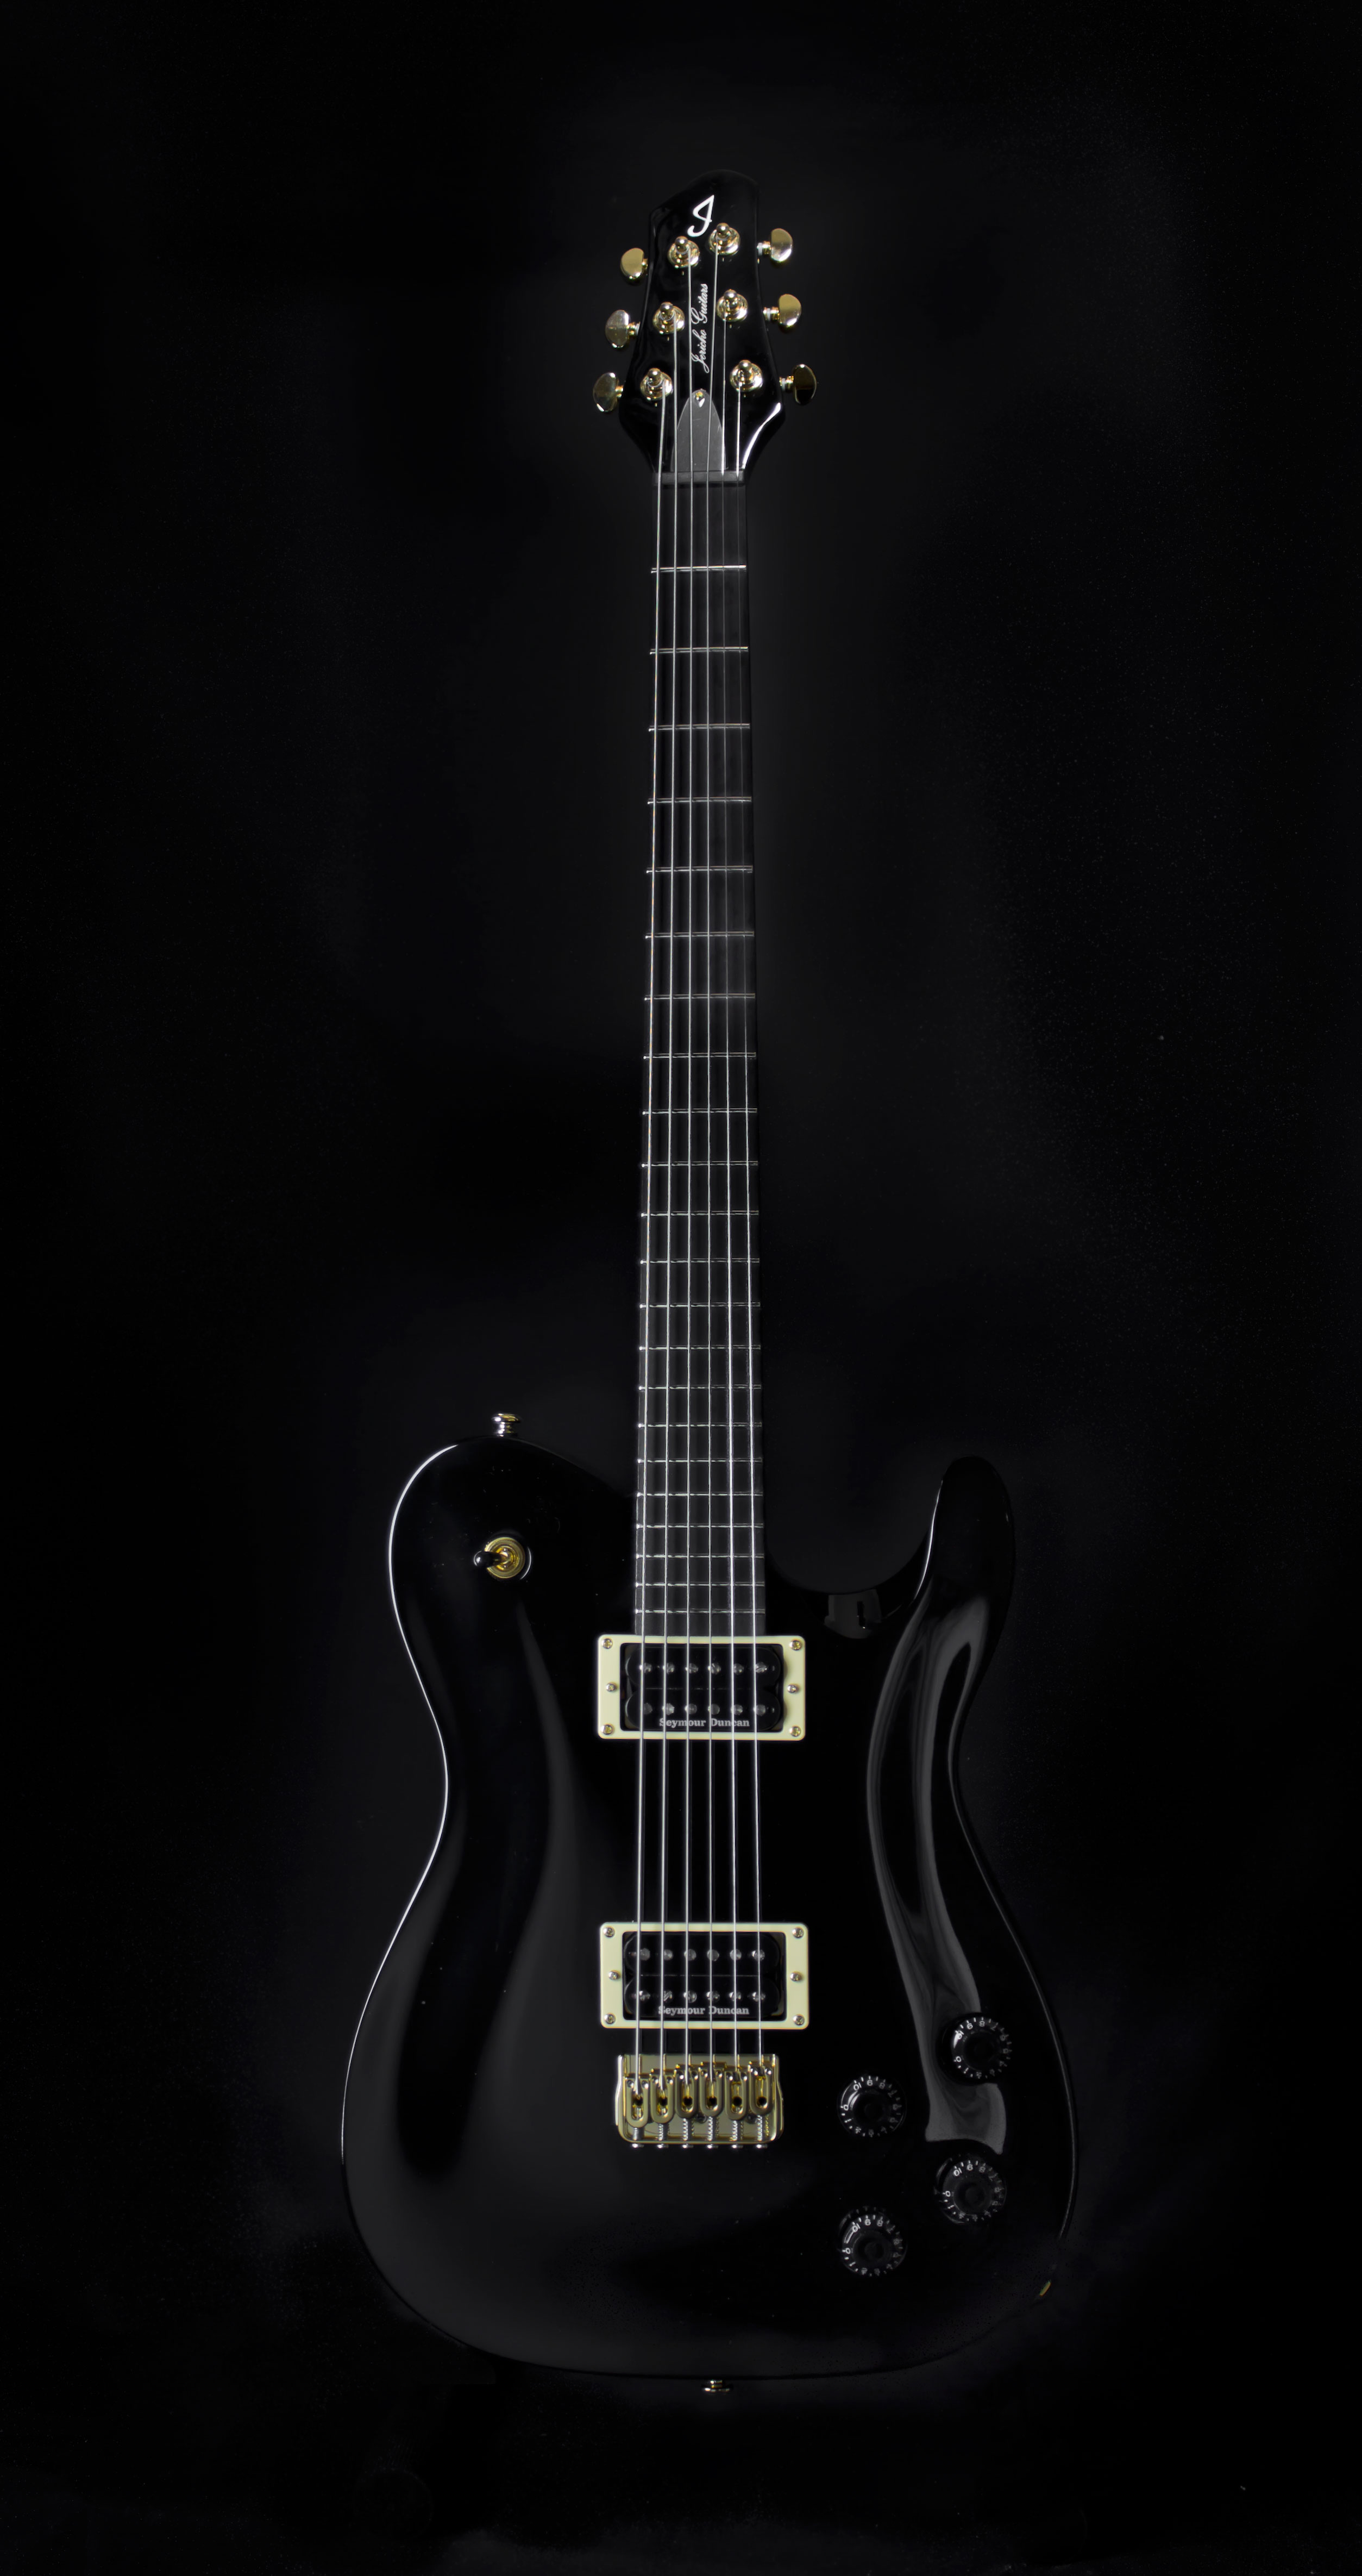 Jericho Guitar's Fusion Black and Gold 26.9